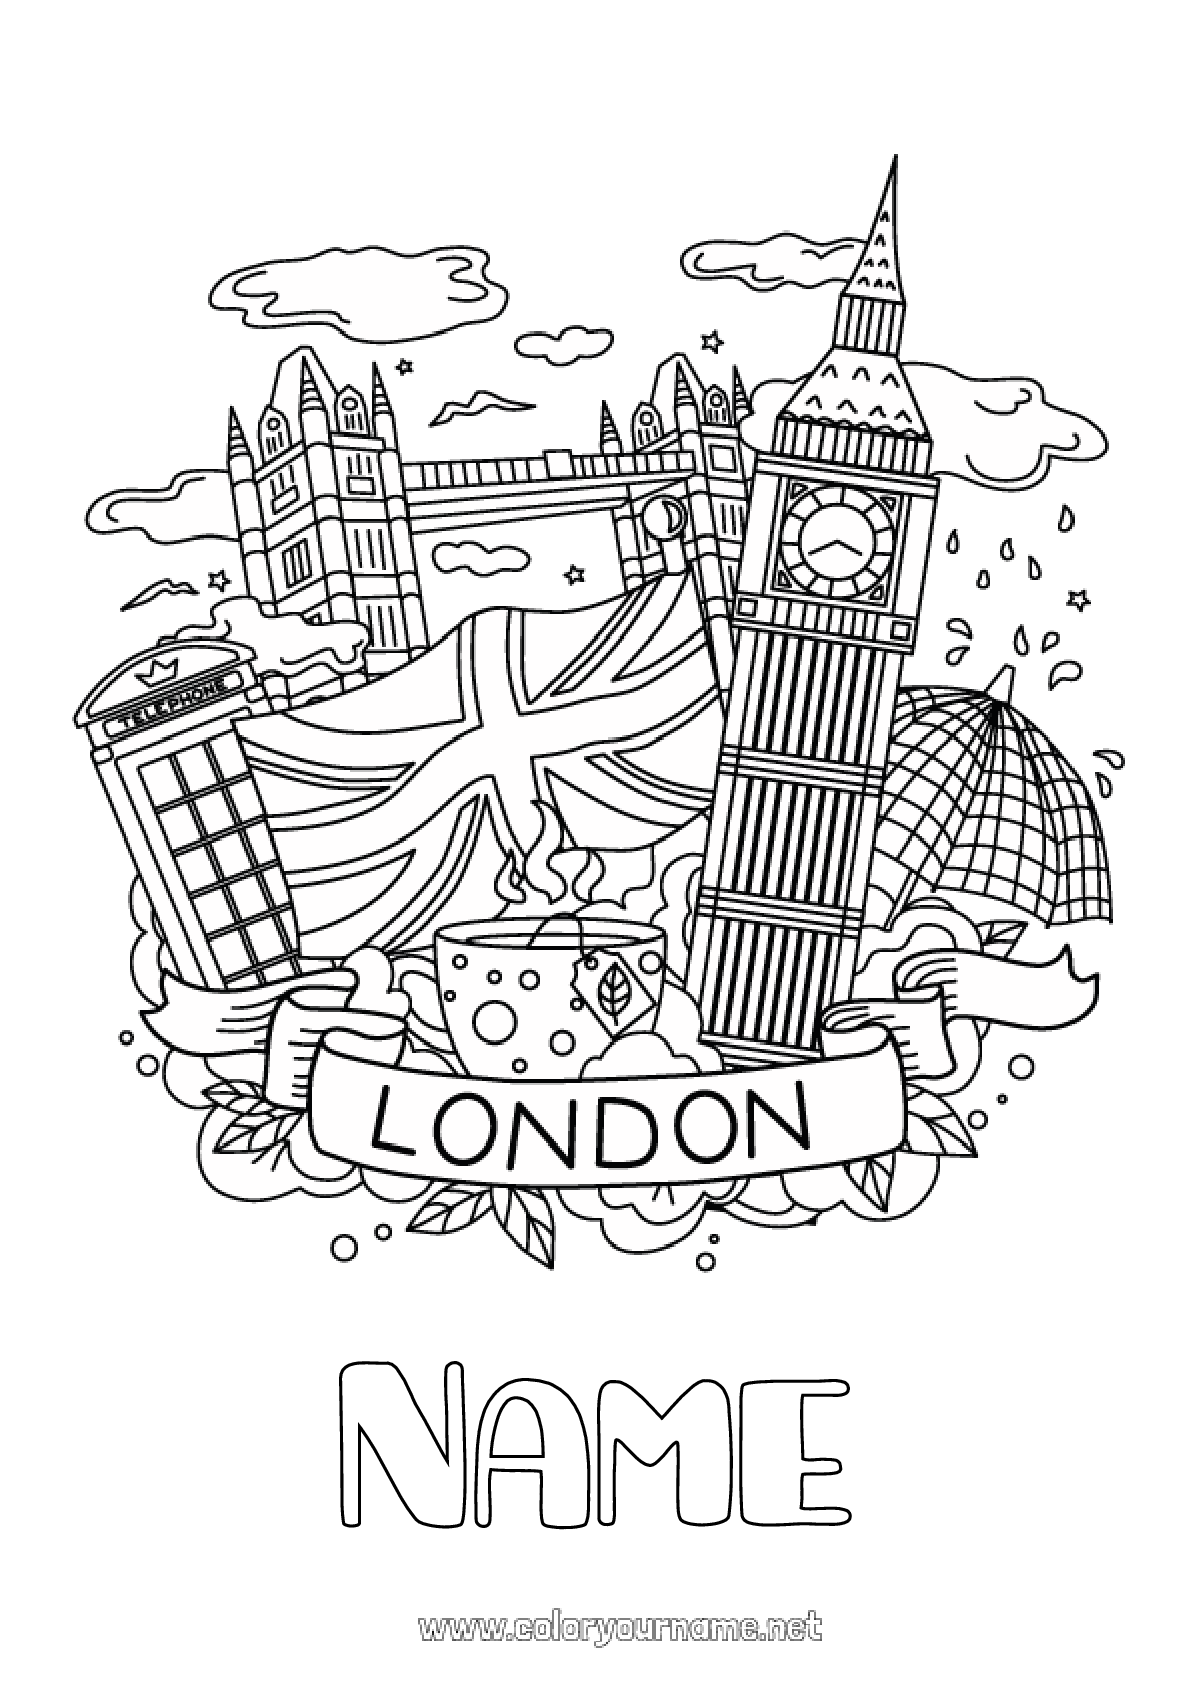 coloring-page-no-1061-geography-london-united-kingdom